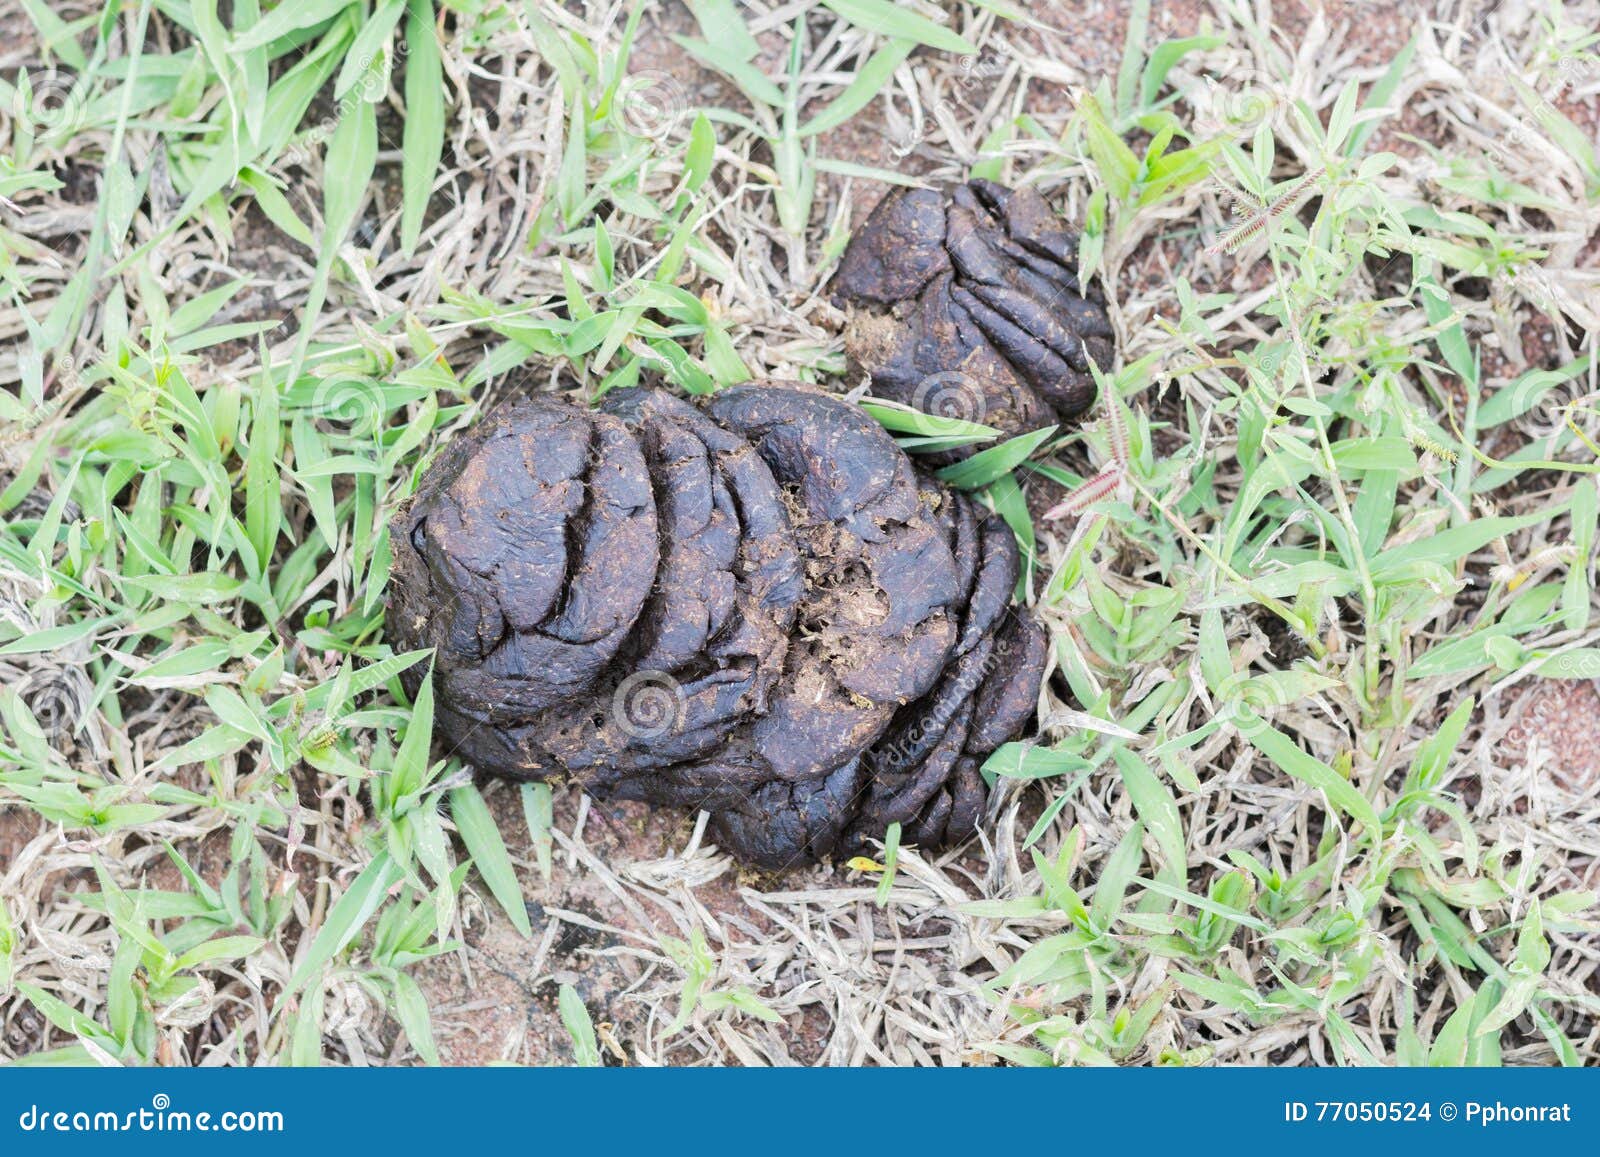 Cow Shit On The Grass Stock Photo Image Of Poop Agriculture